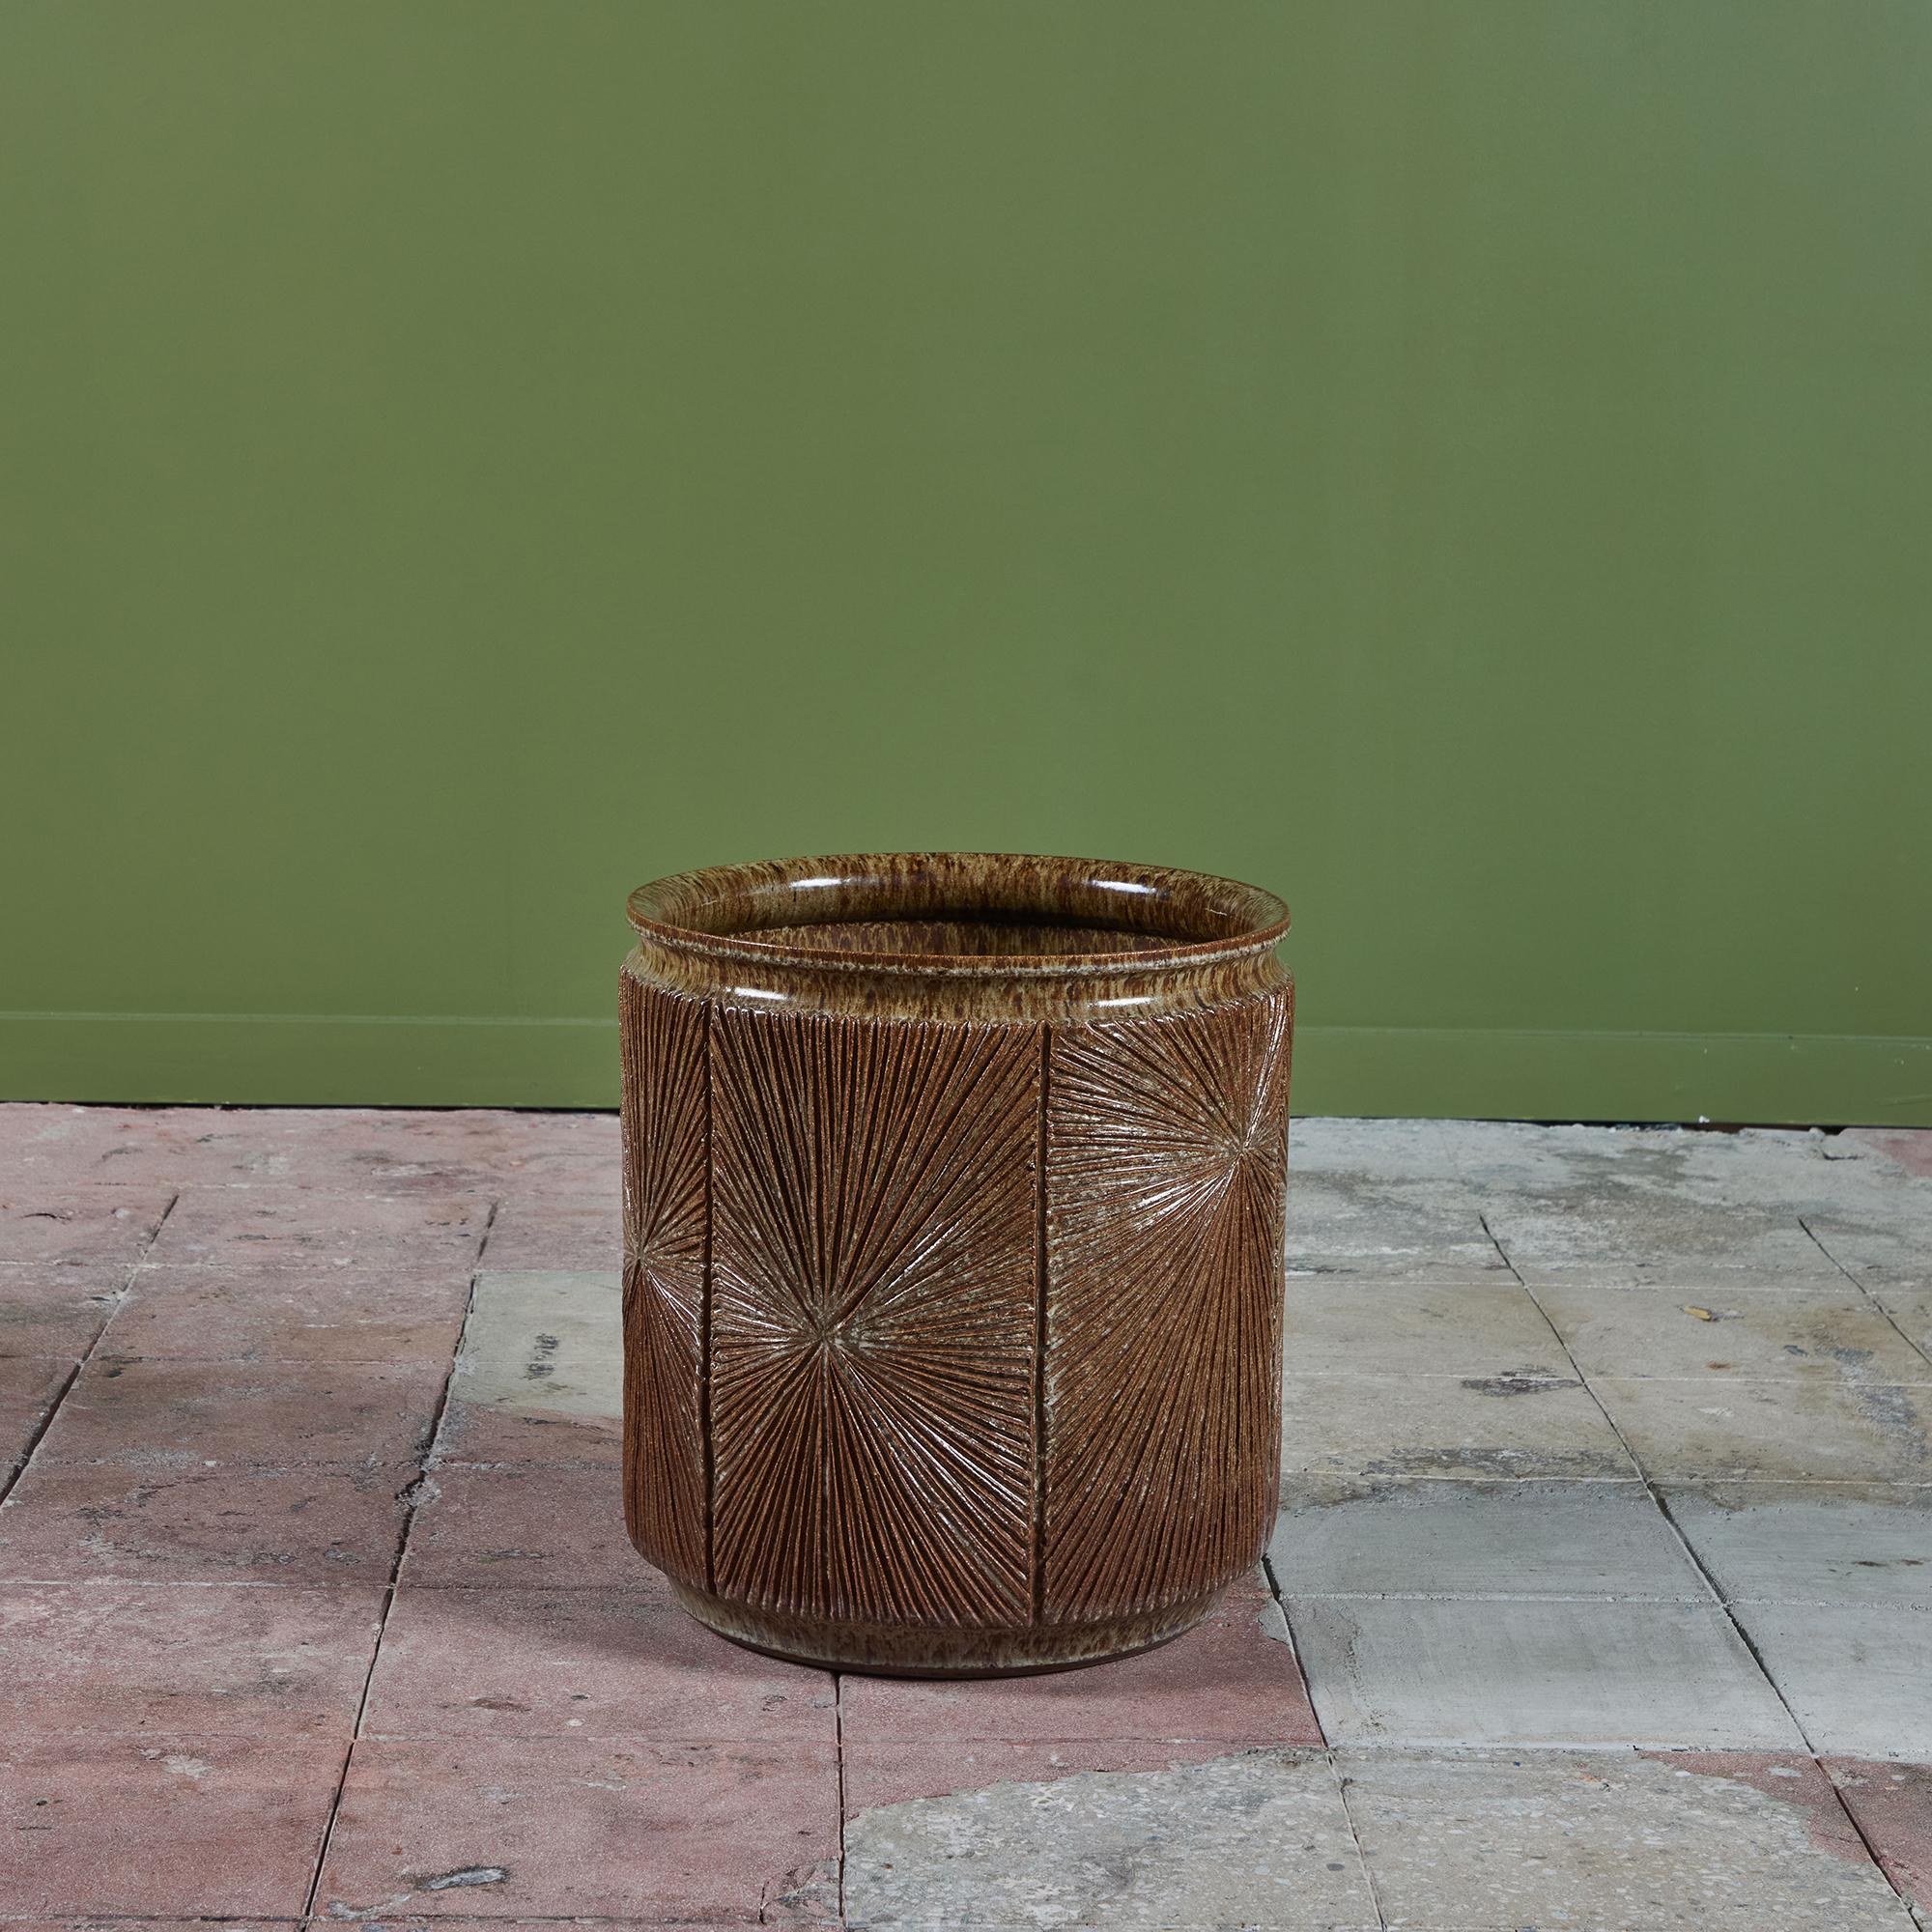 A cylindrical stoneware planter from Robert Maxwell and David Cressey's 1970s collaboration Earthgender. The planter has a rounded lip and an incised all-over sunburst pattern. The interior and exterior of the planter are covered in a speckle taupe